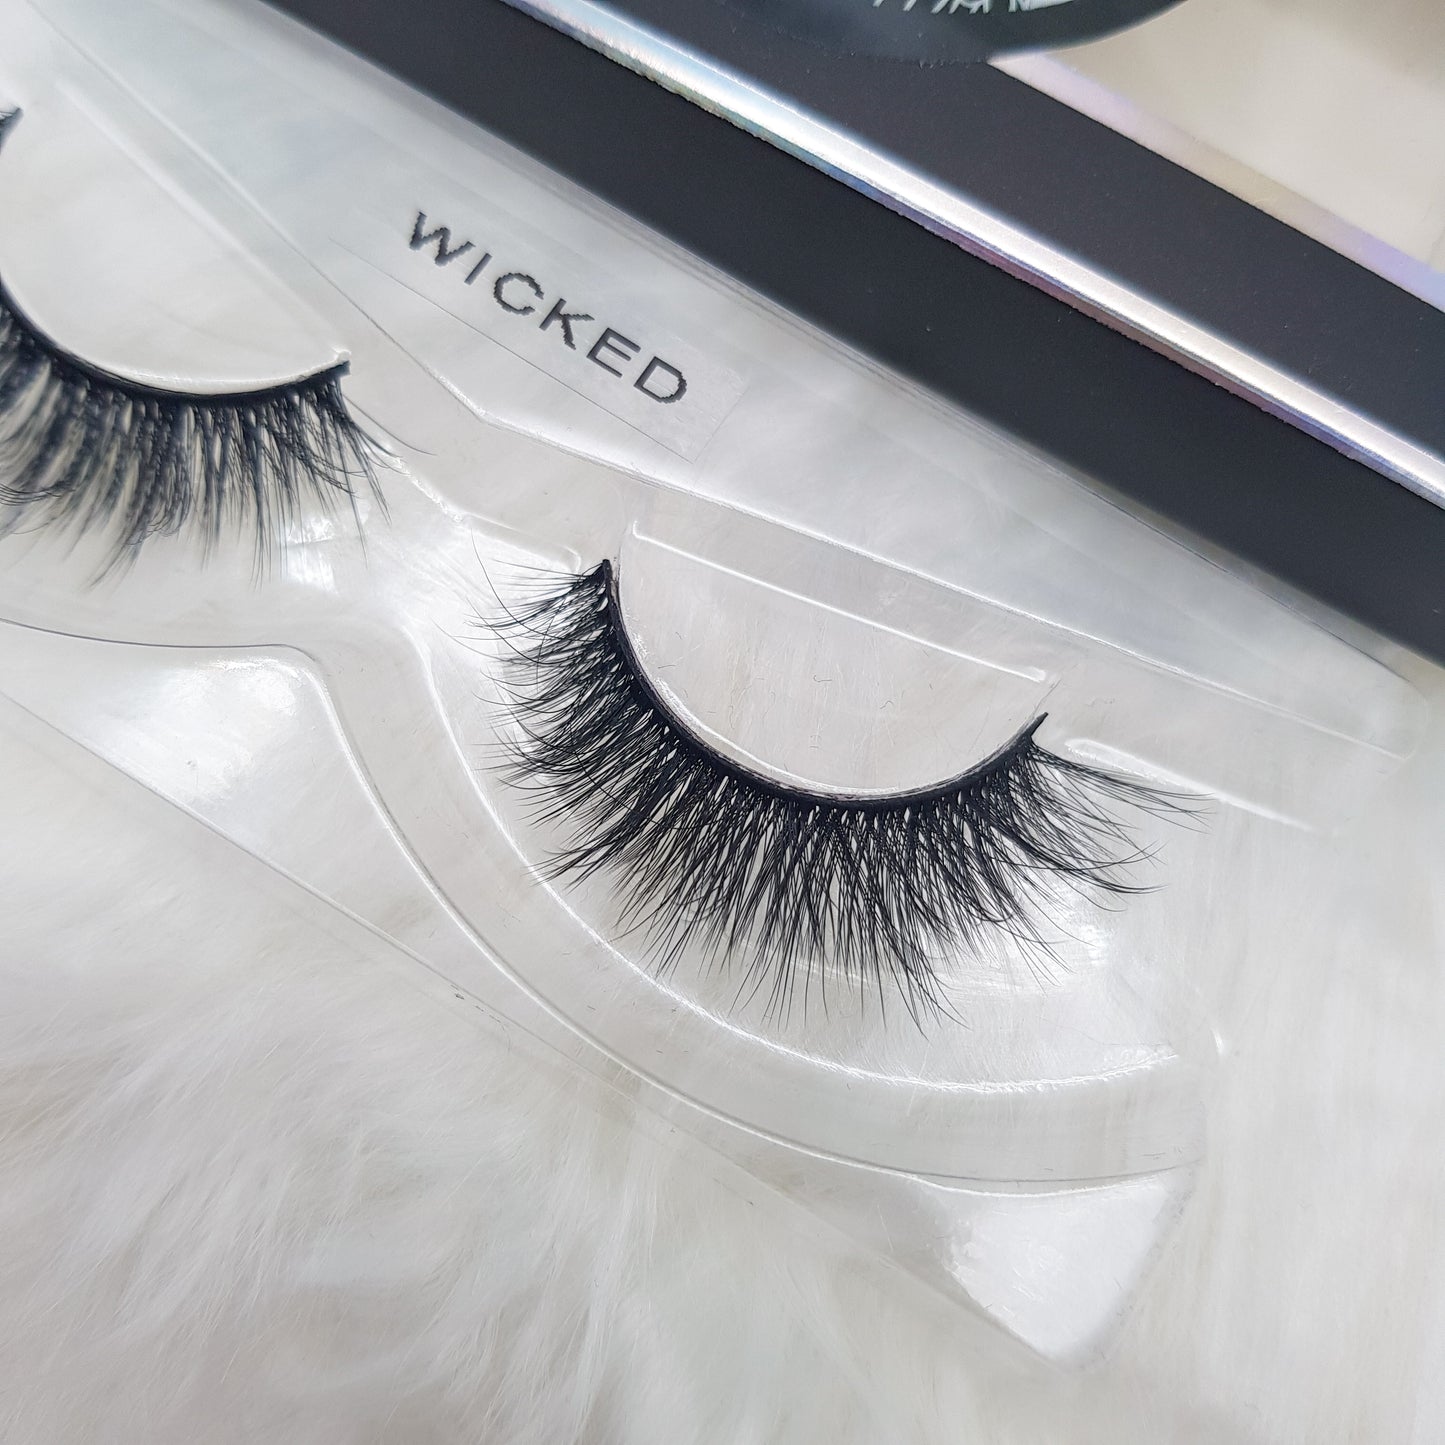 "Wicked" 3D luxury faux mink lashes